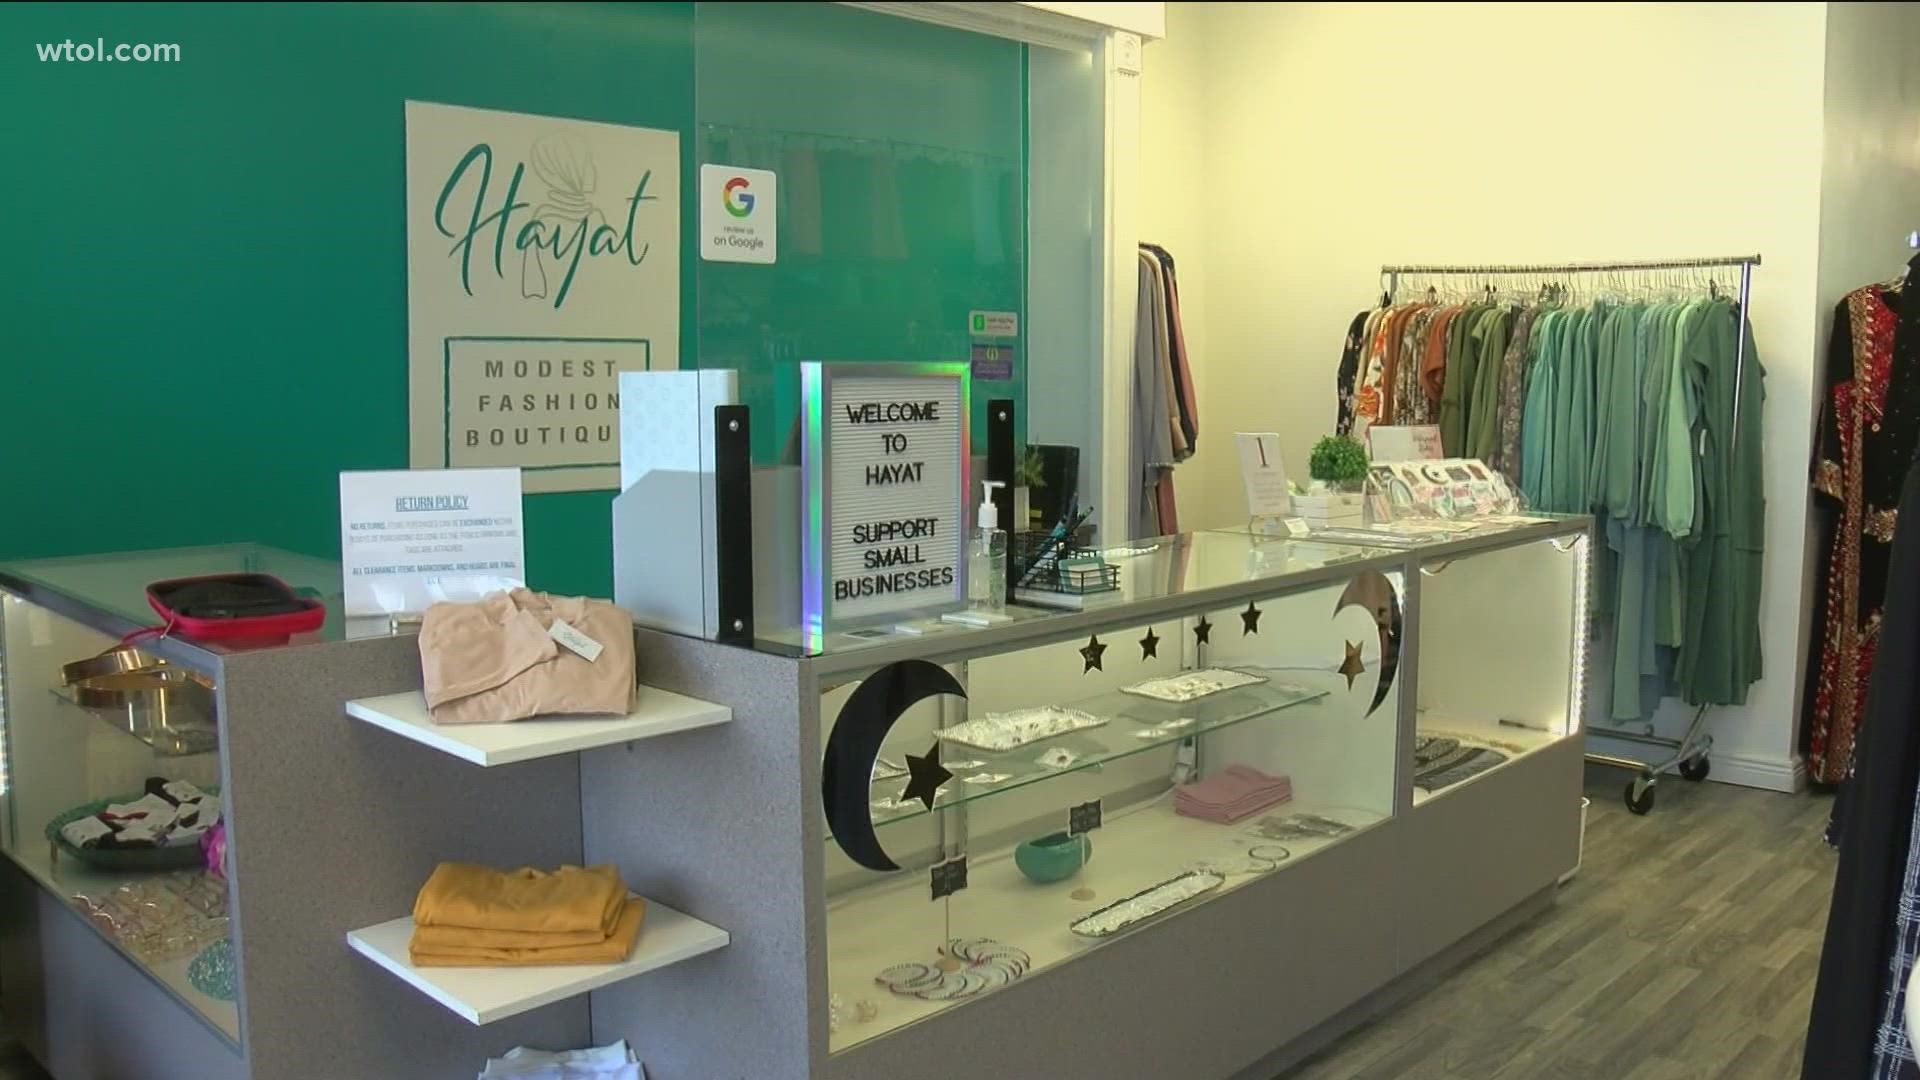 Arab-American Owner Ruqayya Al-Sharari welcomes us to her Holland store which offers shoppers stylish and modest outfits. Watch the rest of the story tonight at 5!